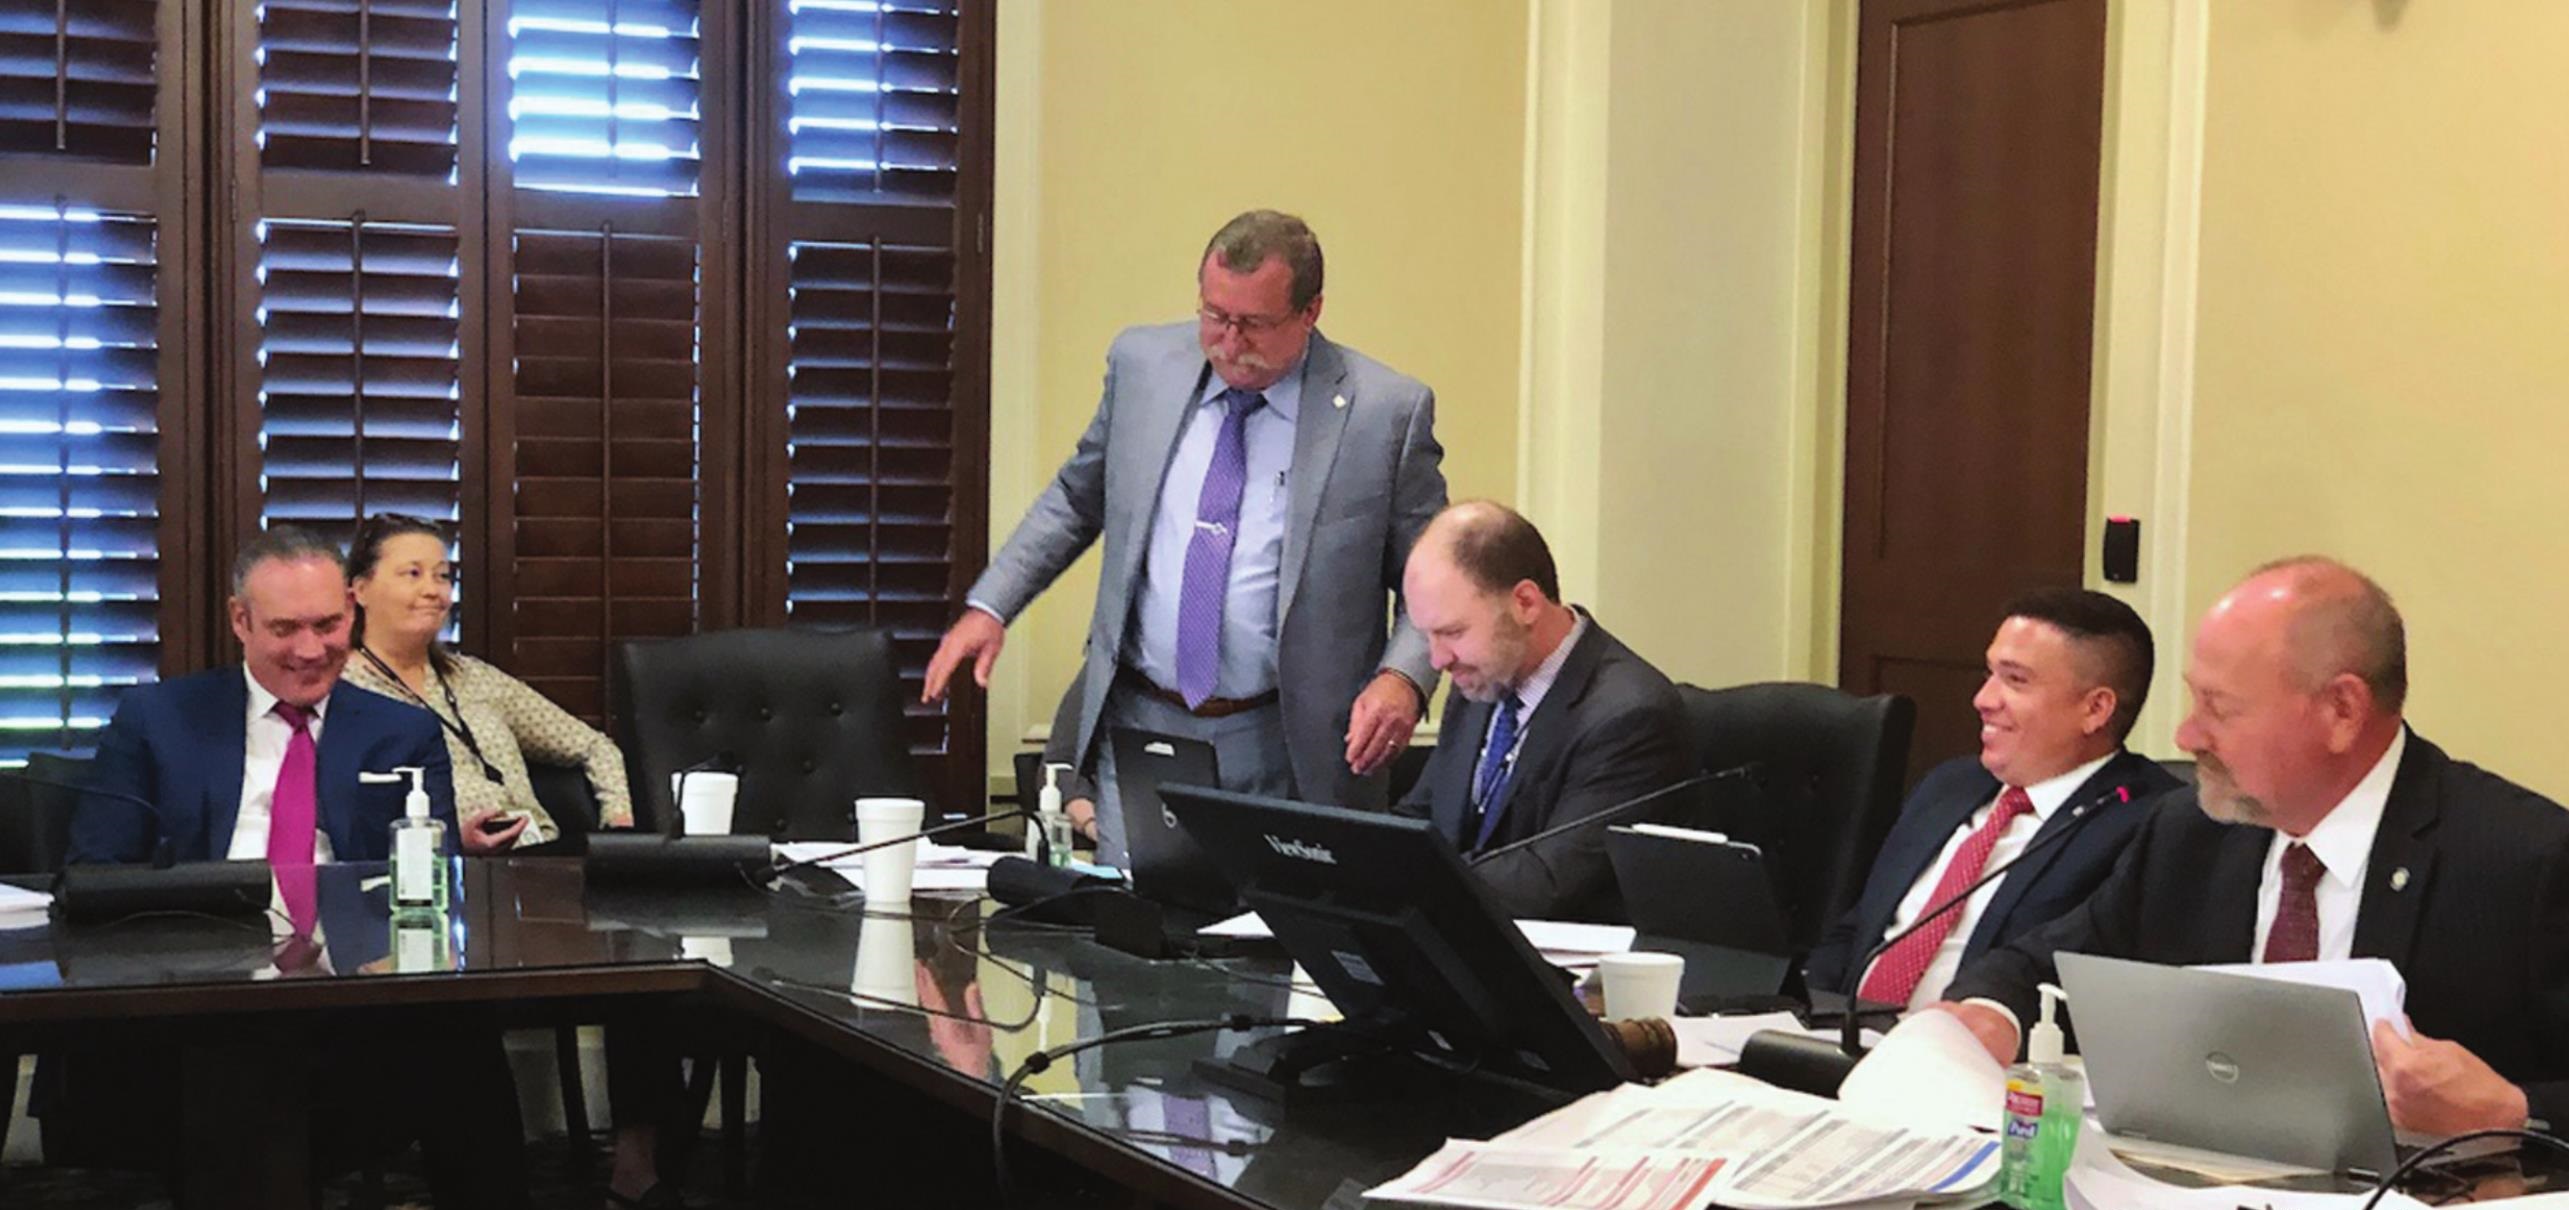 Flanked by members of house leadership, Rep. Mark McBride, R-Moore, takes his seat to present a bill after “ordering a dishwasher” on his cell phone Tuesday. Tres Savage/nondoc.com